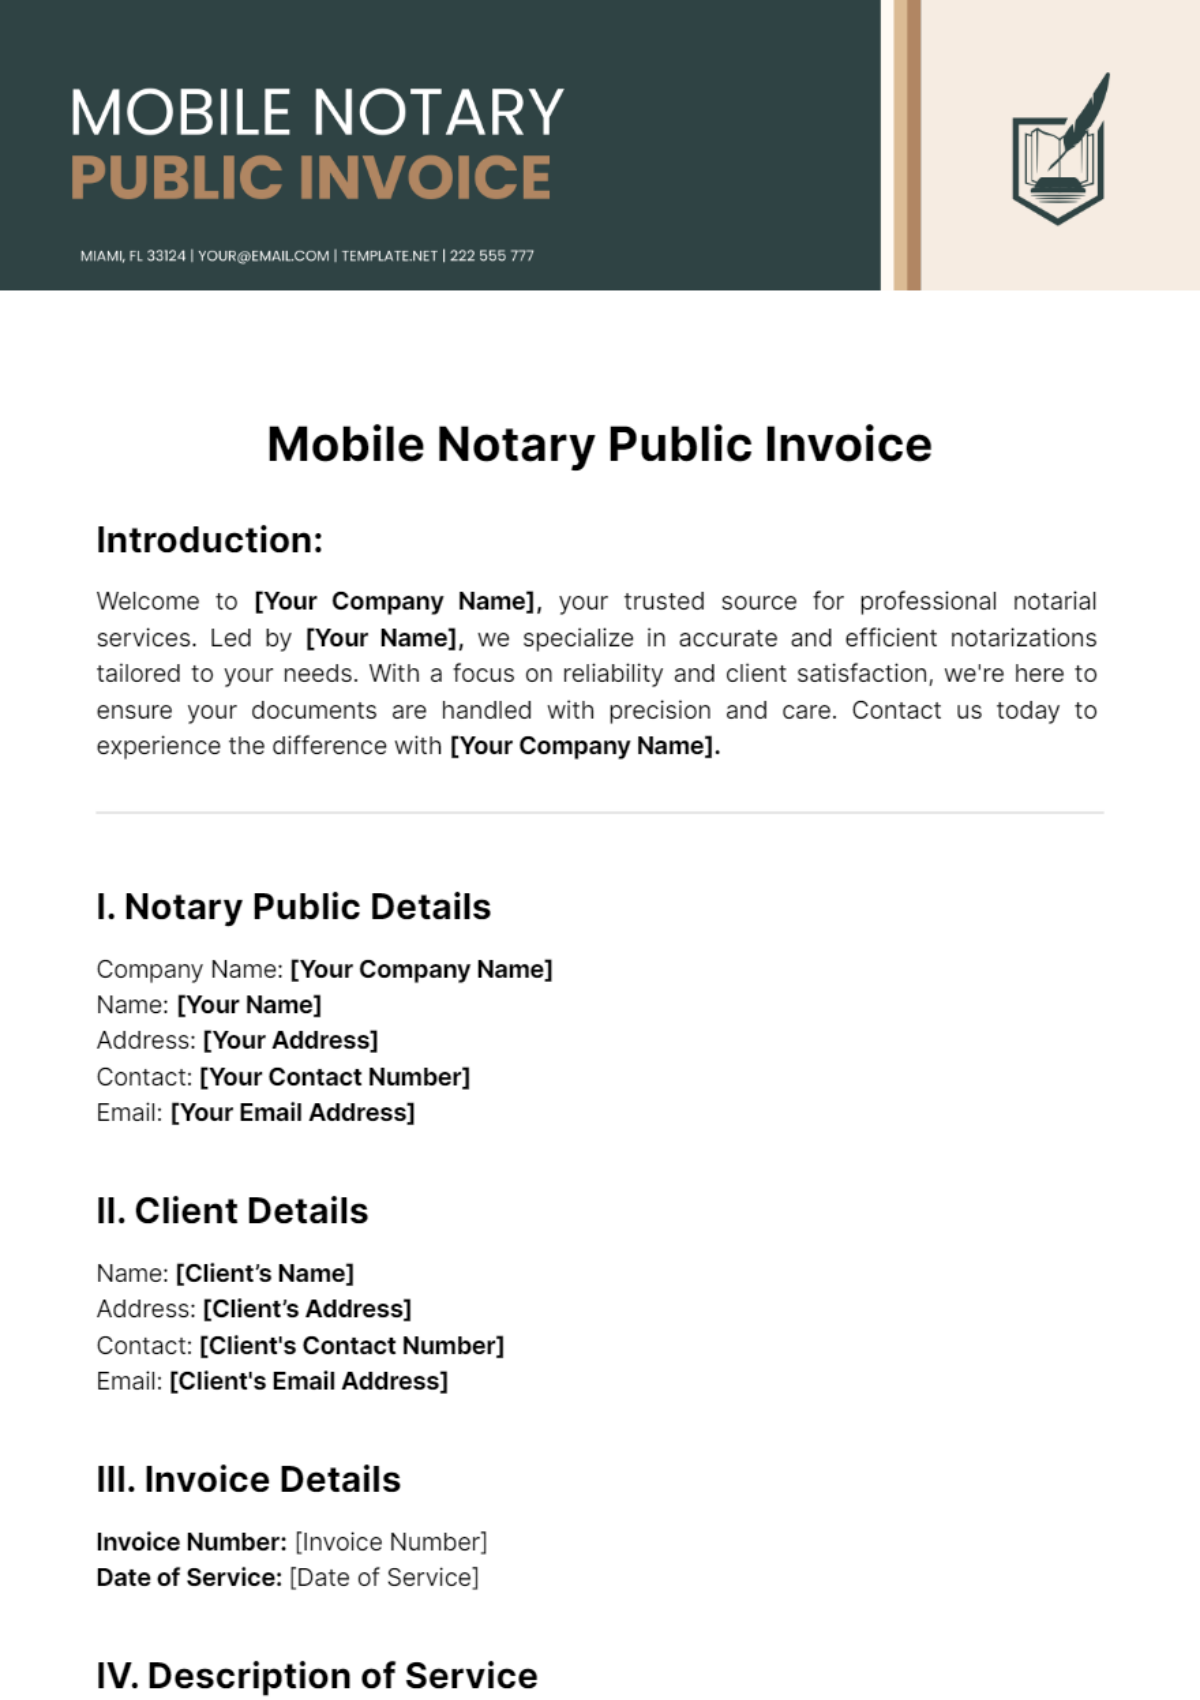 Mobile Notary Public Invoice Template